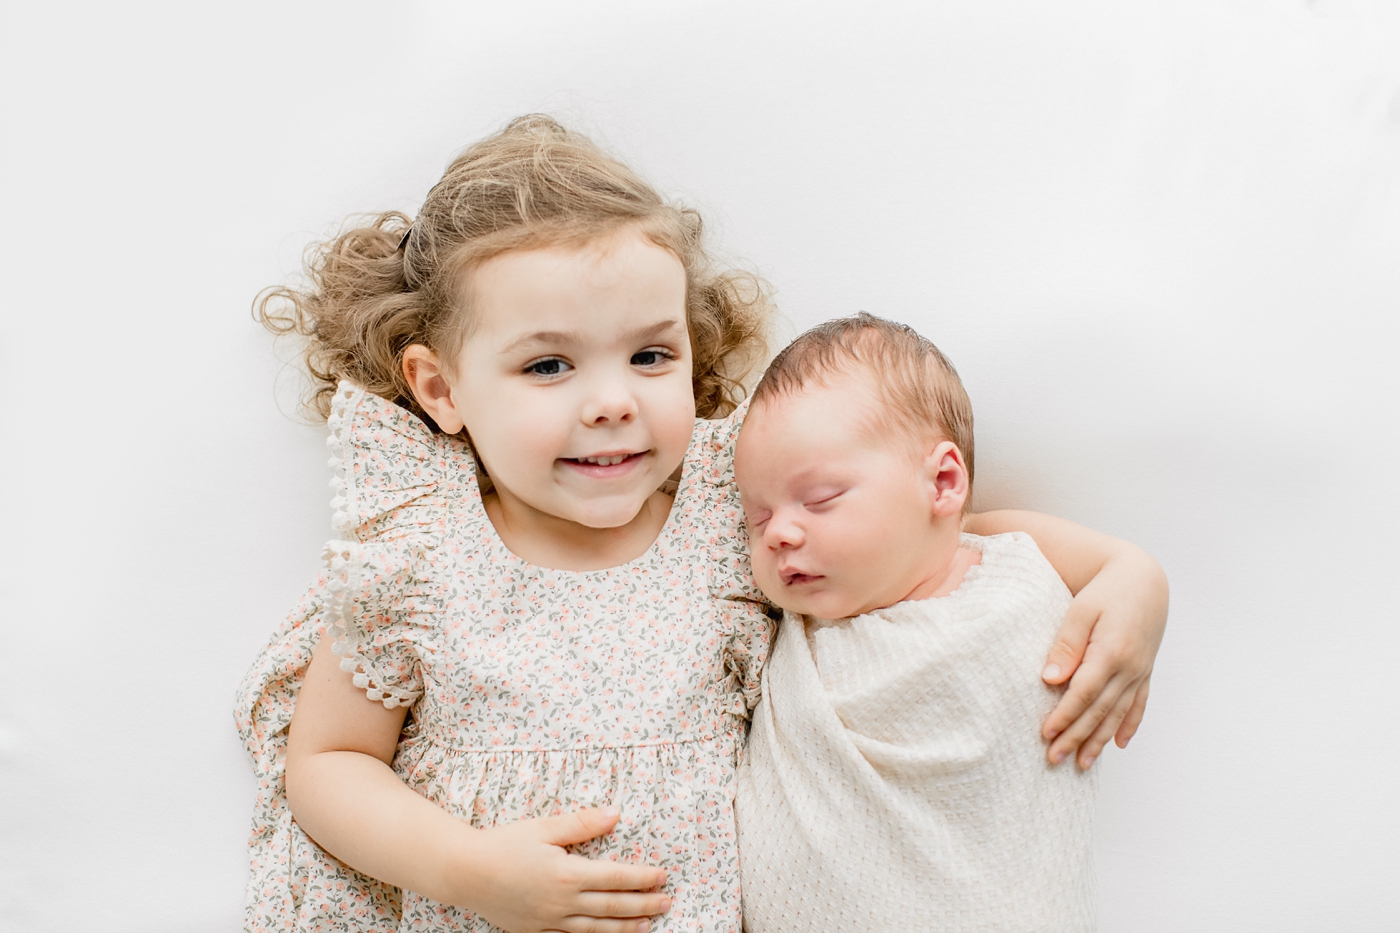 Big sister holding newborn baby brother during in studio newborn session. Photo by Sana Ahmed Photography.